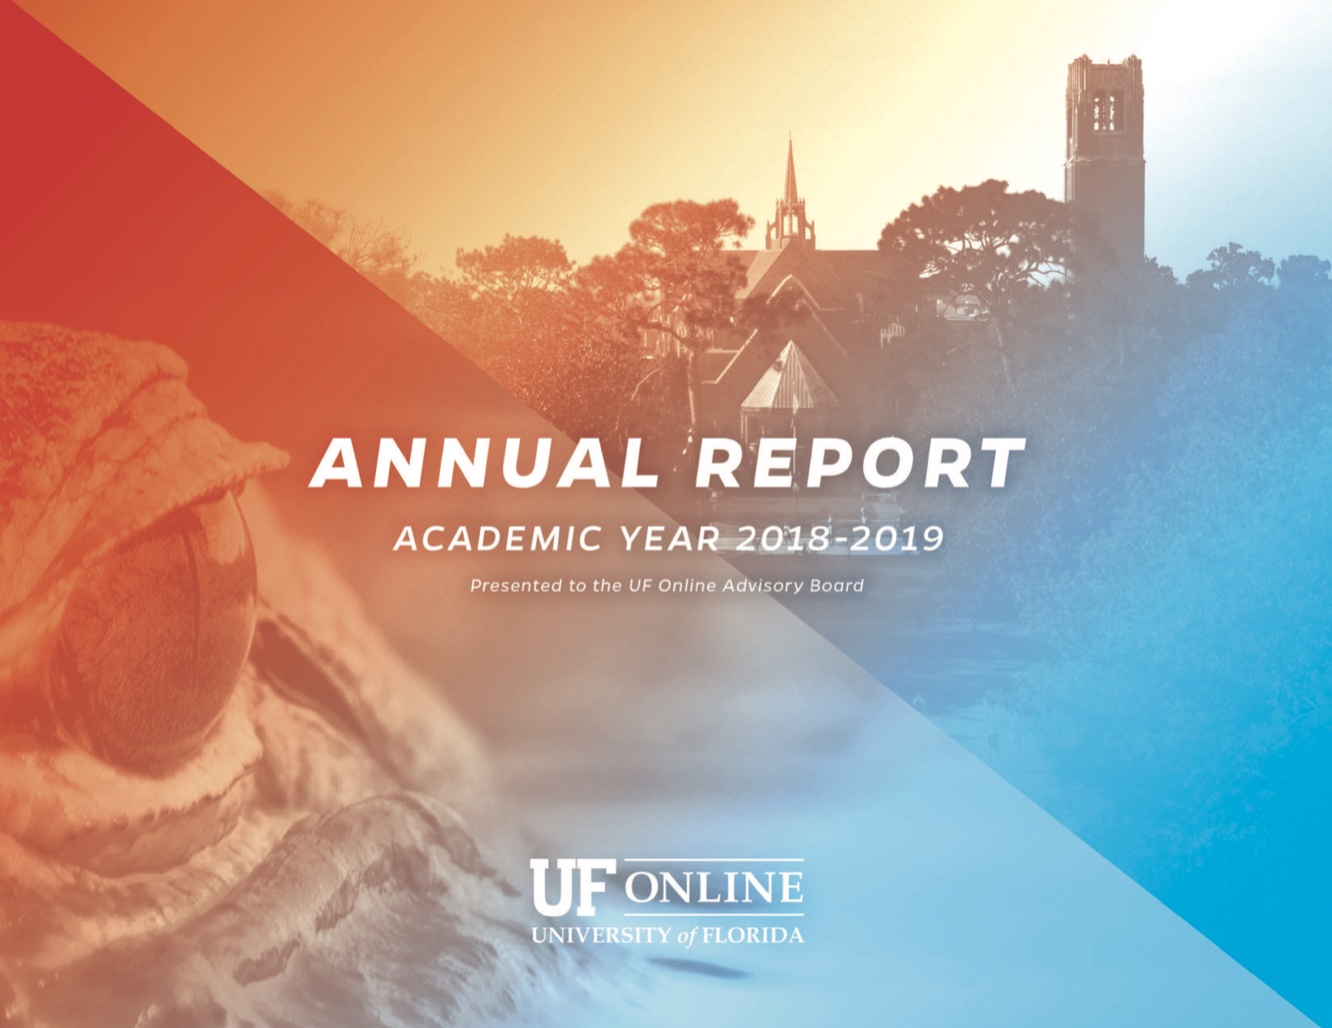 UF Online image of the cover of the UFO 2016-2017 Annual Report